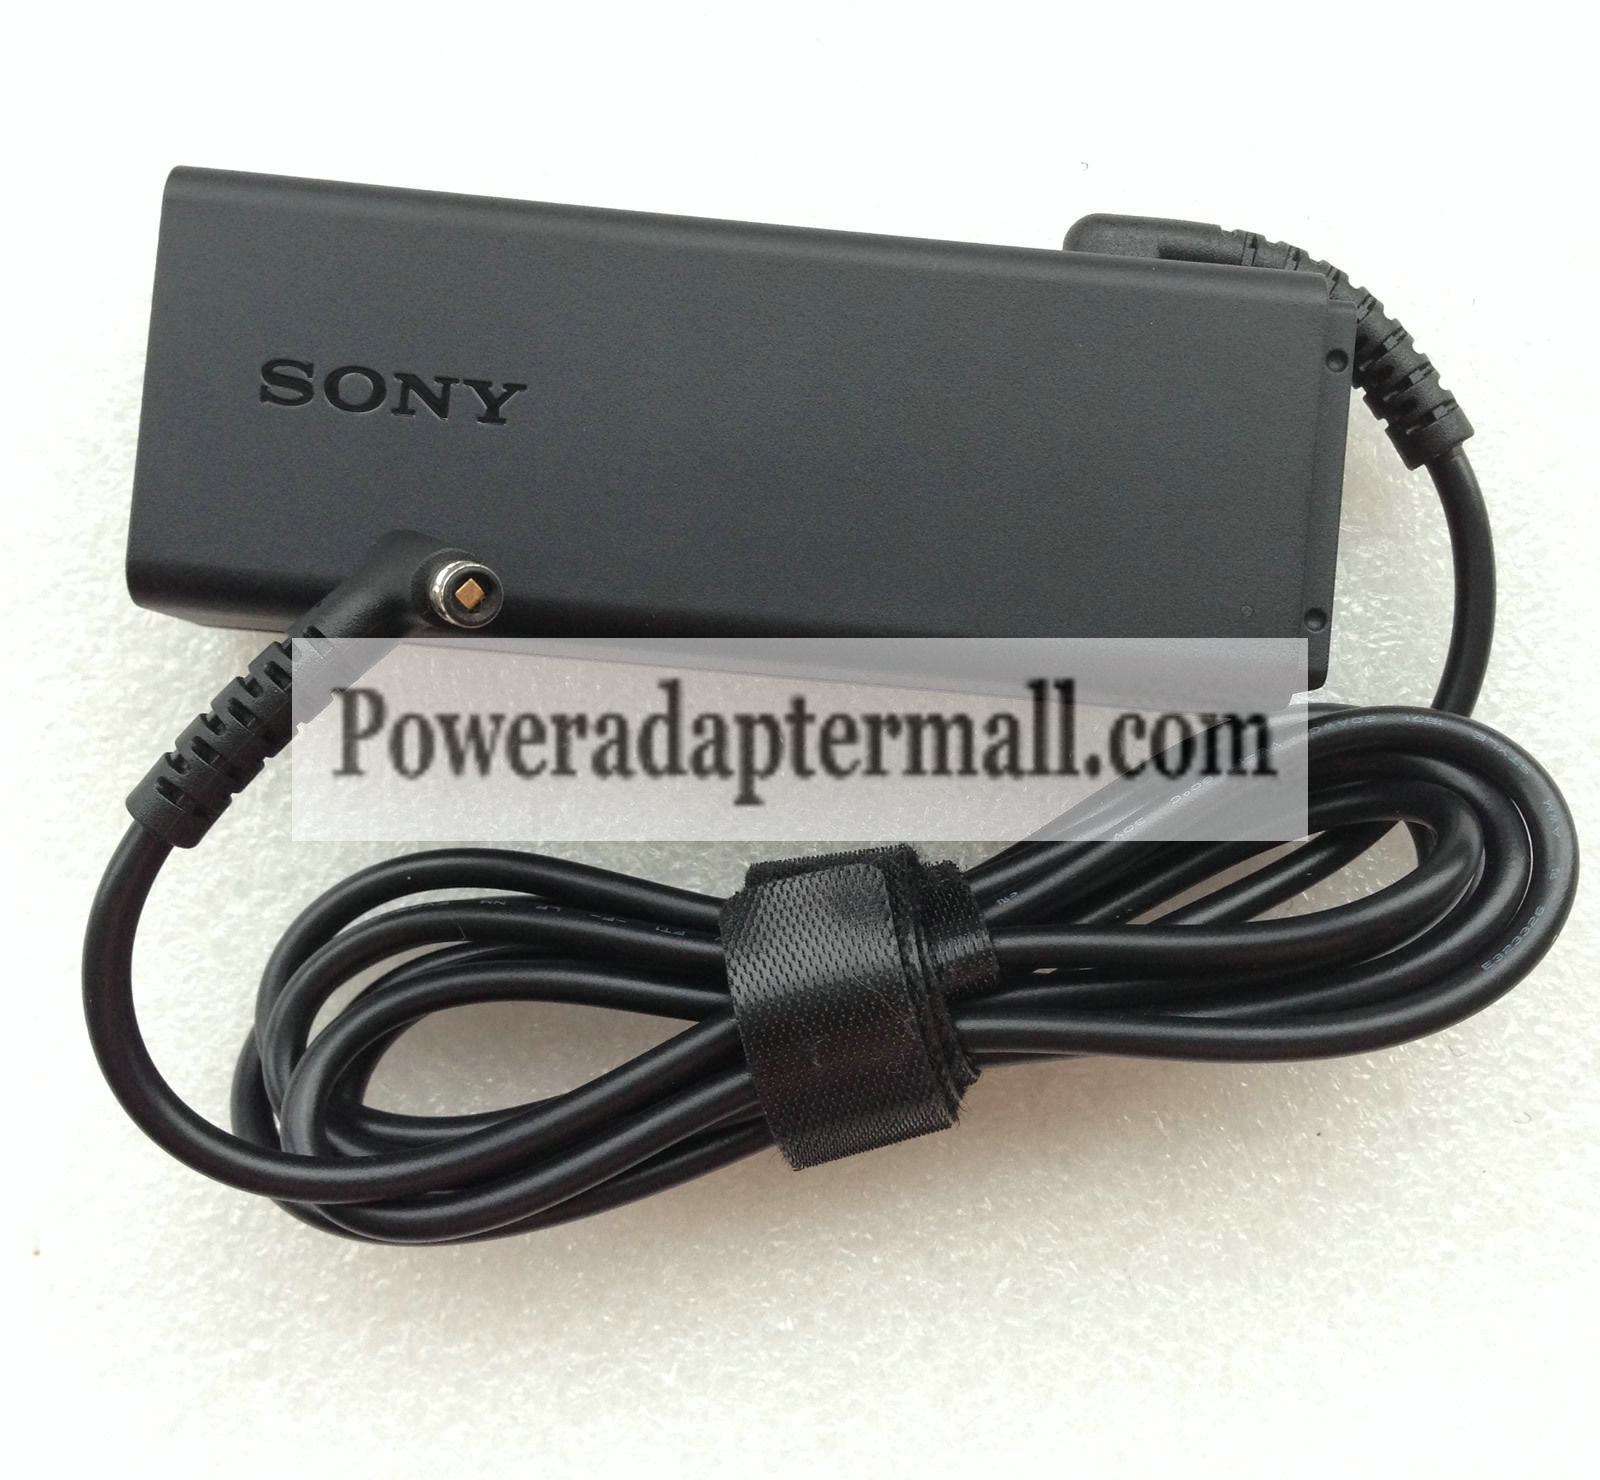 Genuine 19.5V/5V Sony VAIO Tap 11 SVT1122A4RW AC Adapter Charger - Click Image to Close